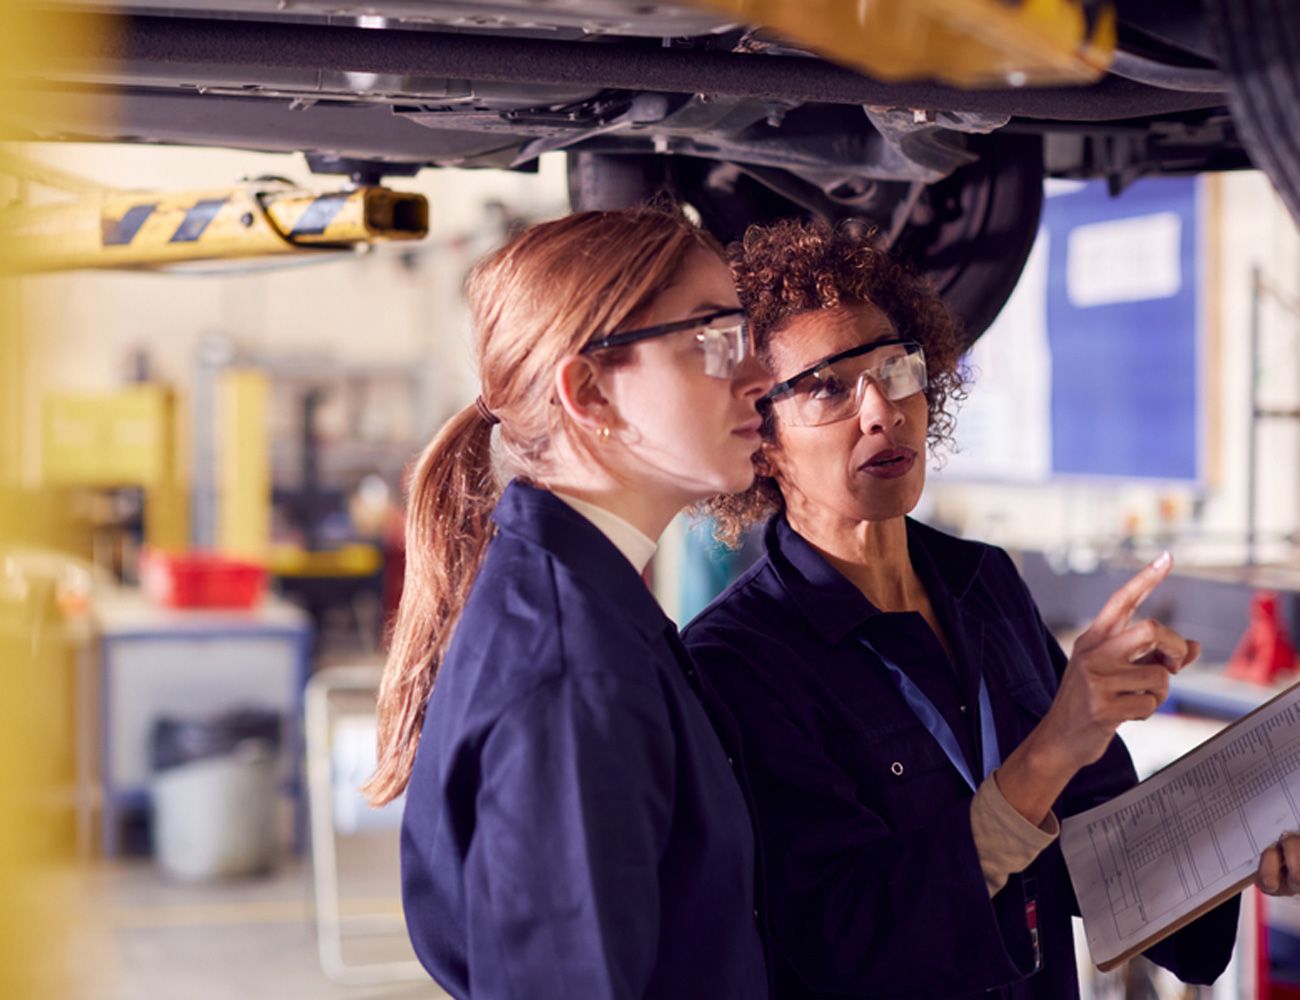 Female instructor shows a student different mechanisms on the underside of a car